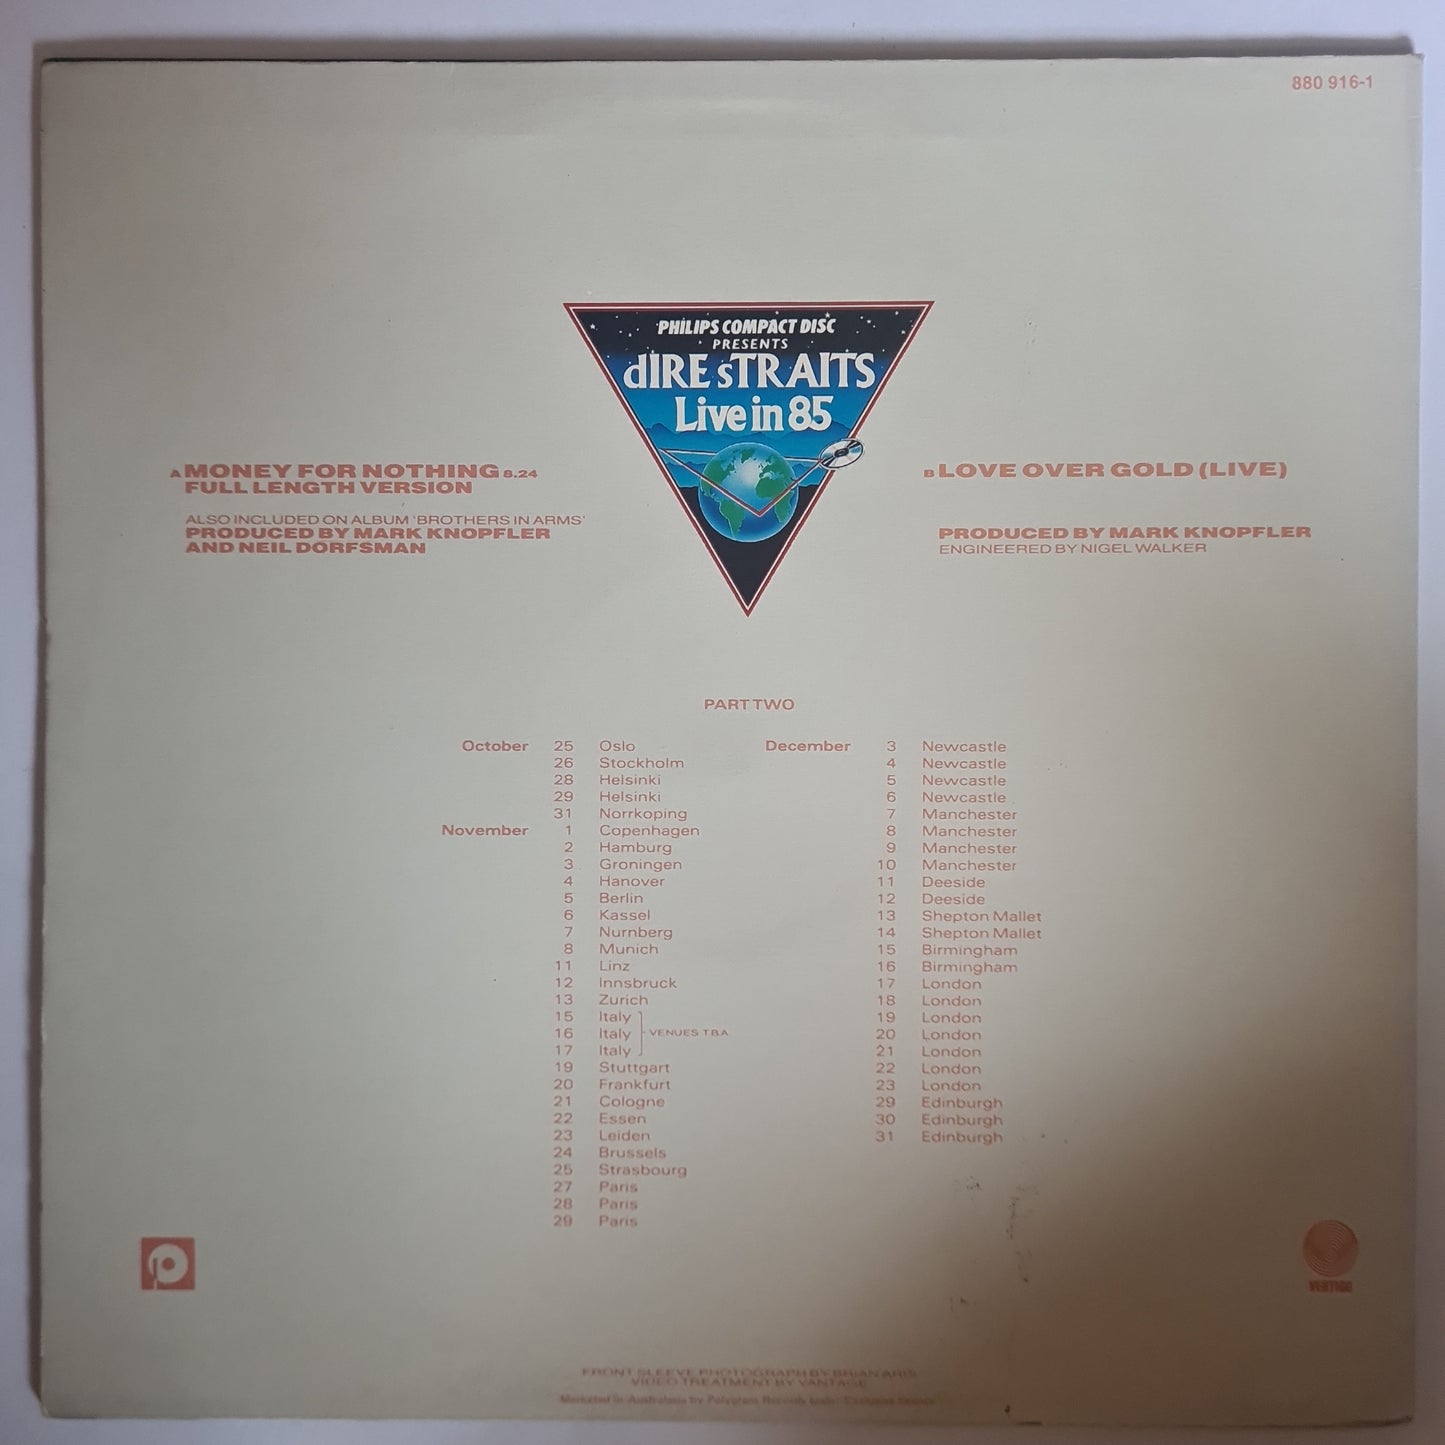 Dire Straits – Money For Nothing (Full Length Version)- 1985 (12inch Maxi Single) - Vinyl Record